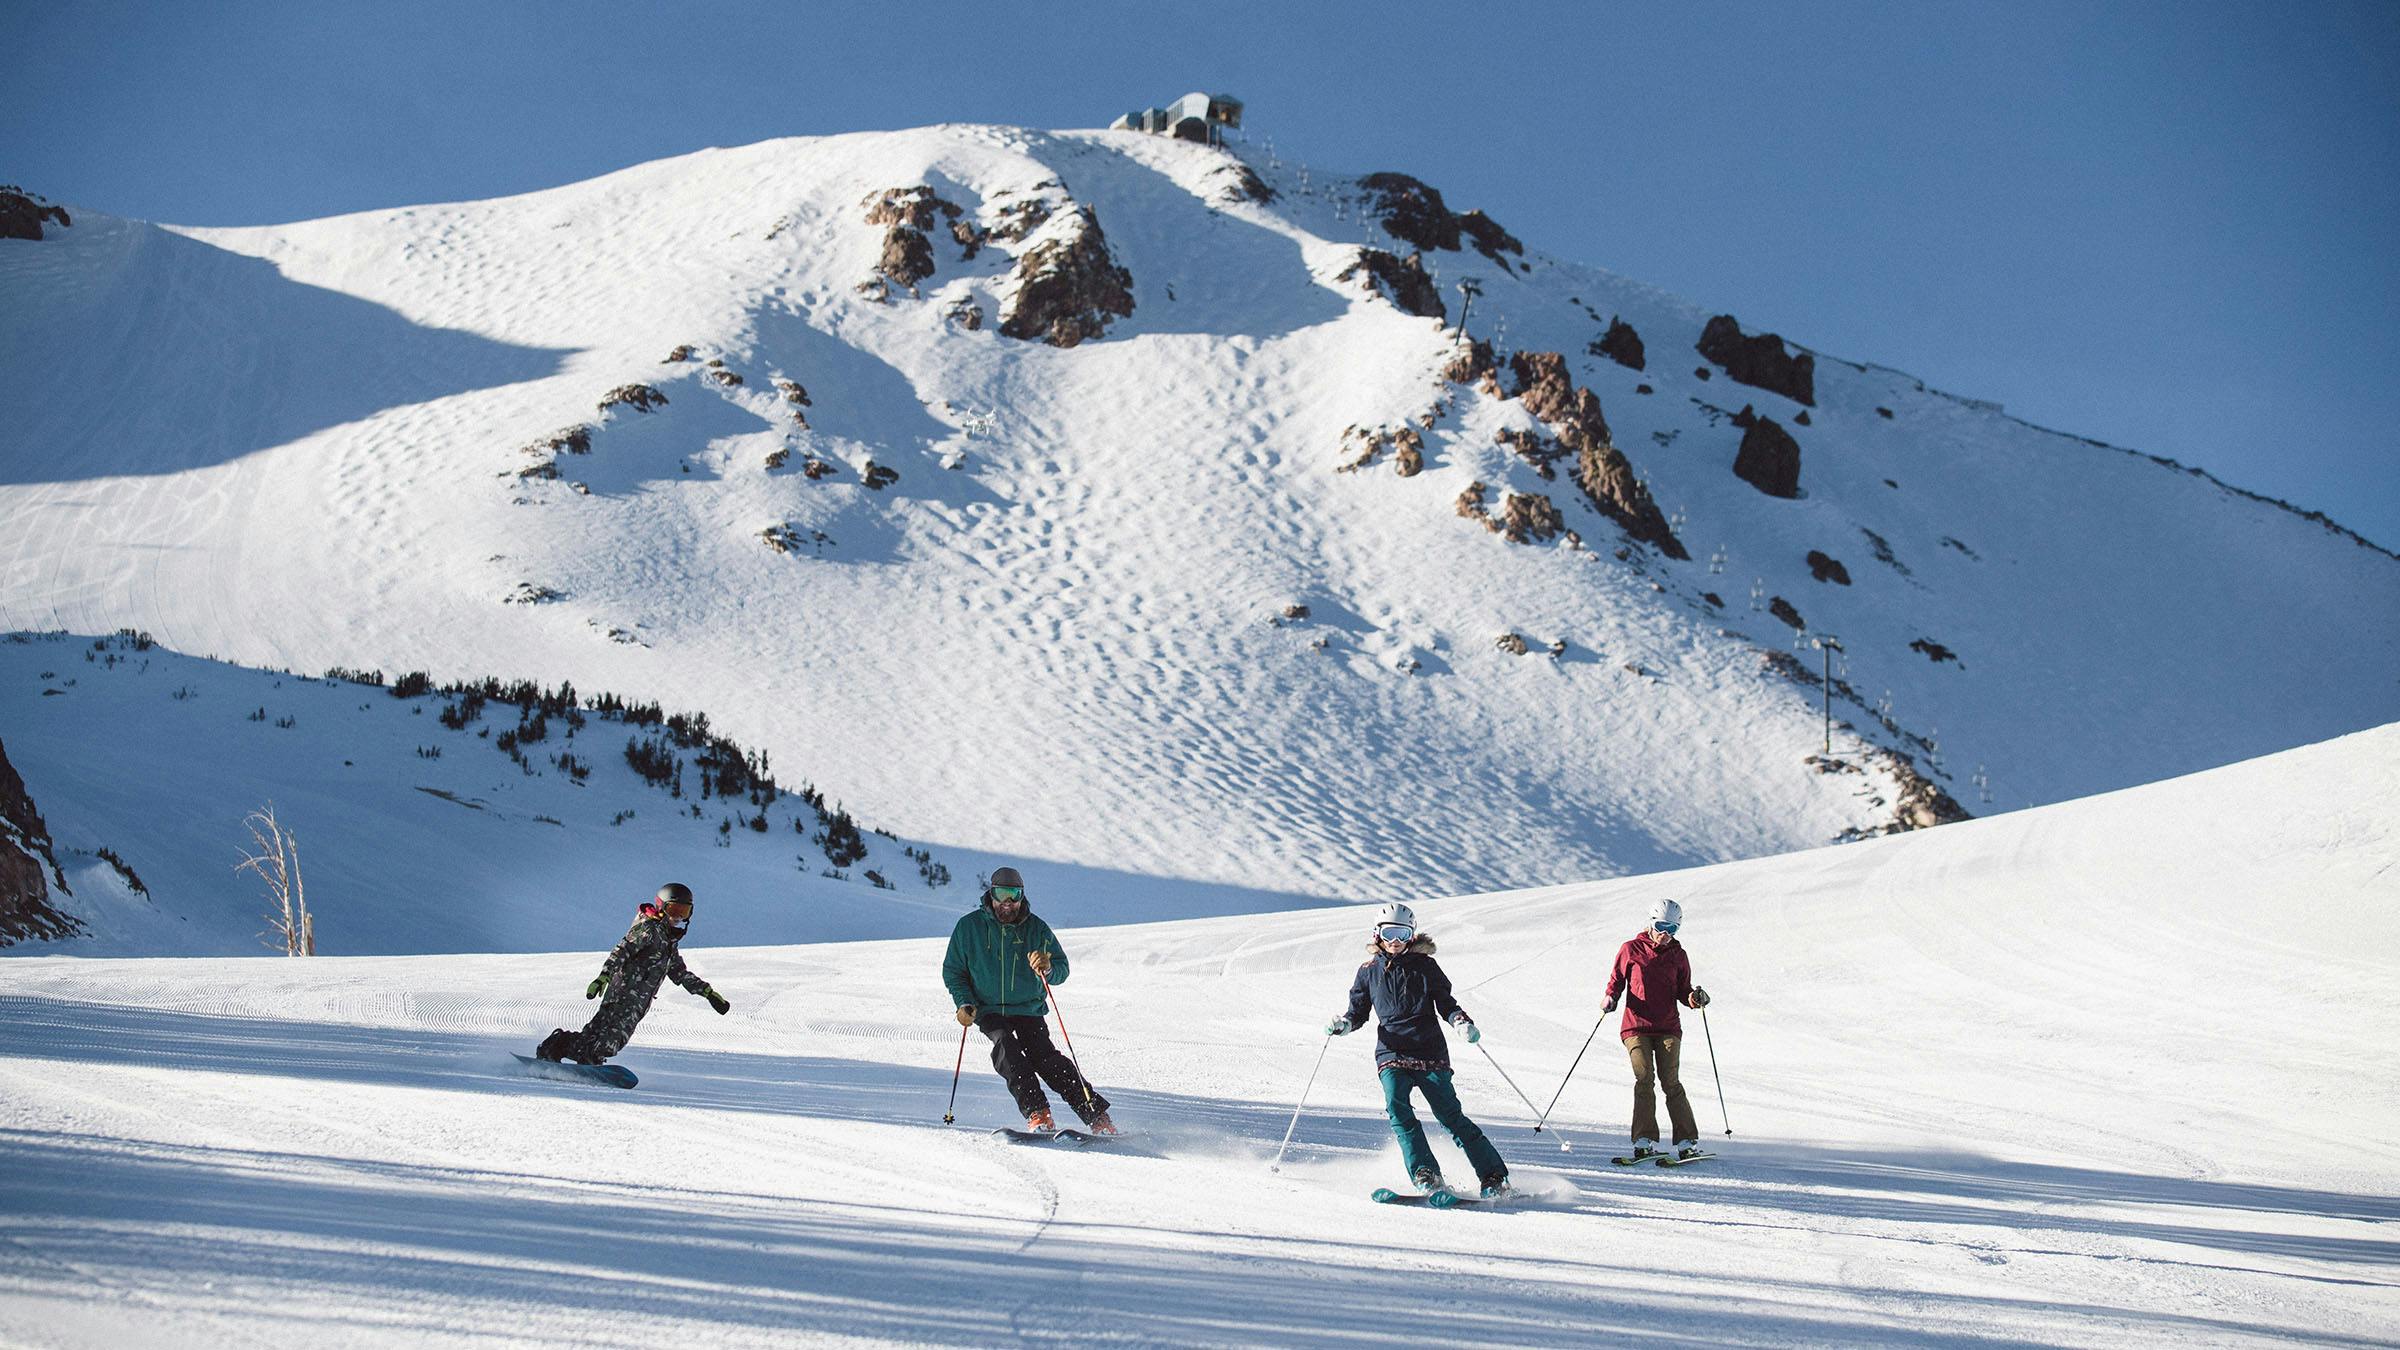 4 skiers on a bluebird day enjoying morning groomers with Mammoth Mountain in background